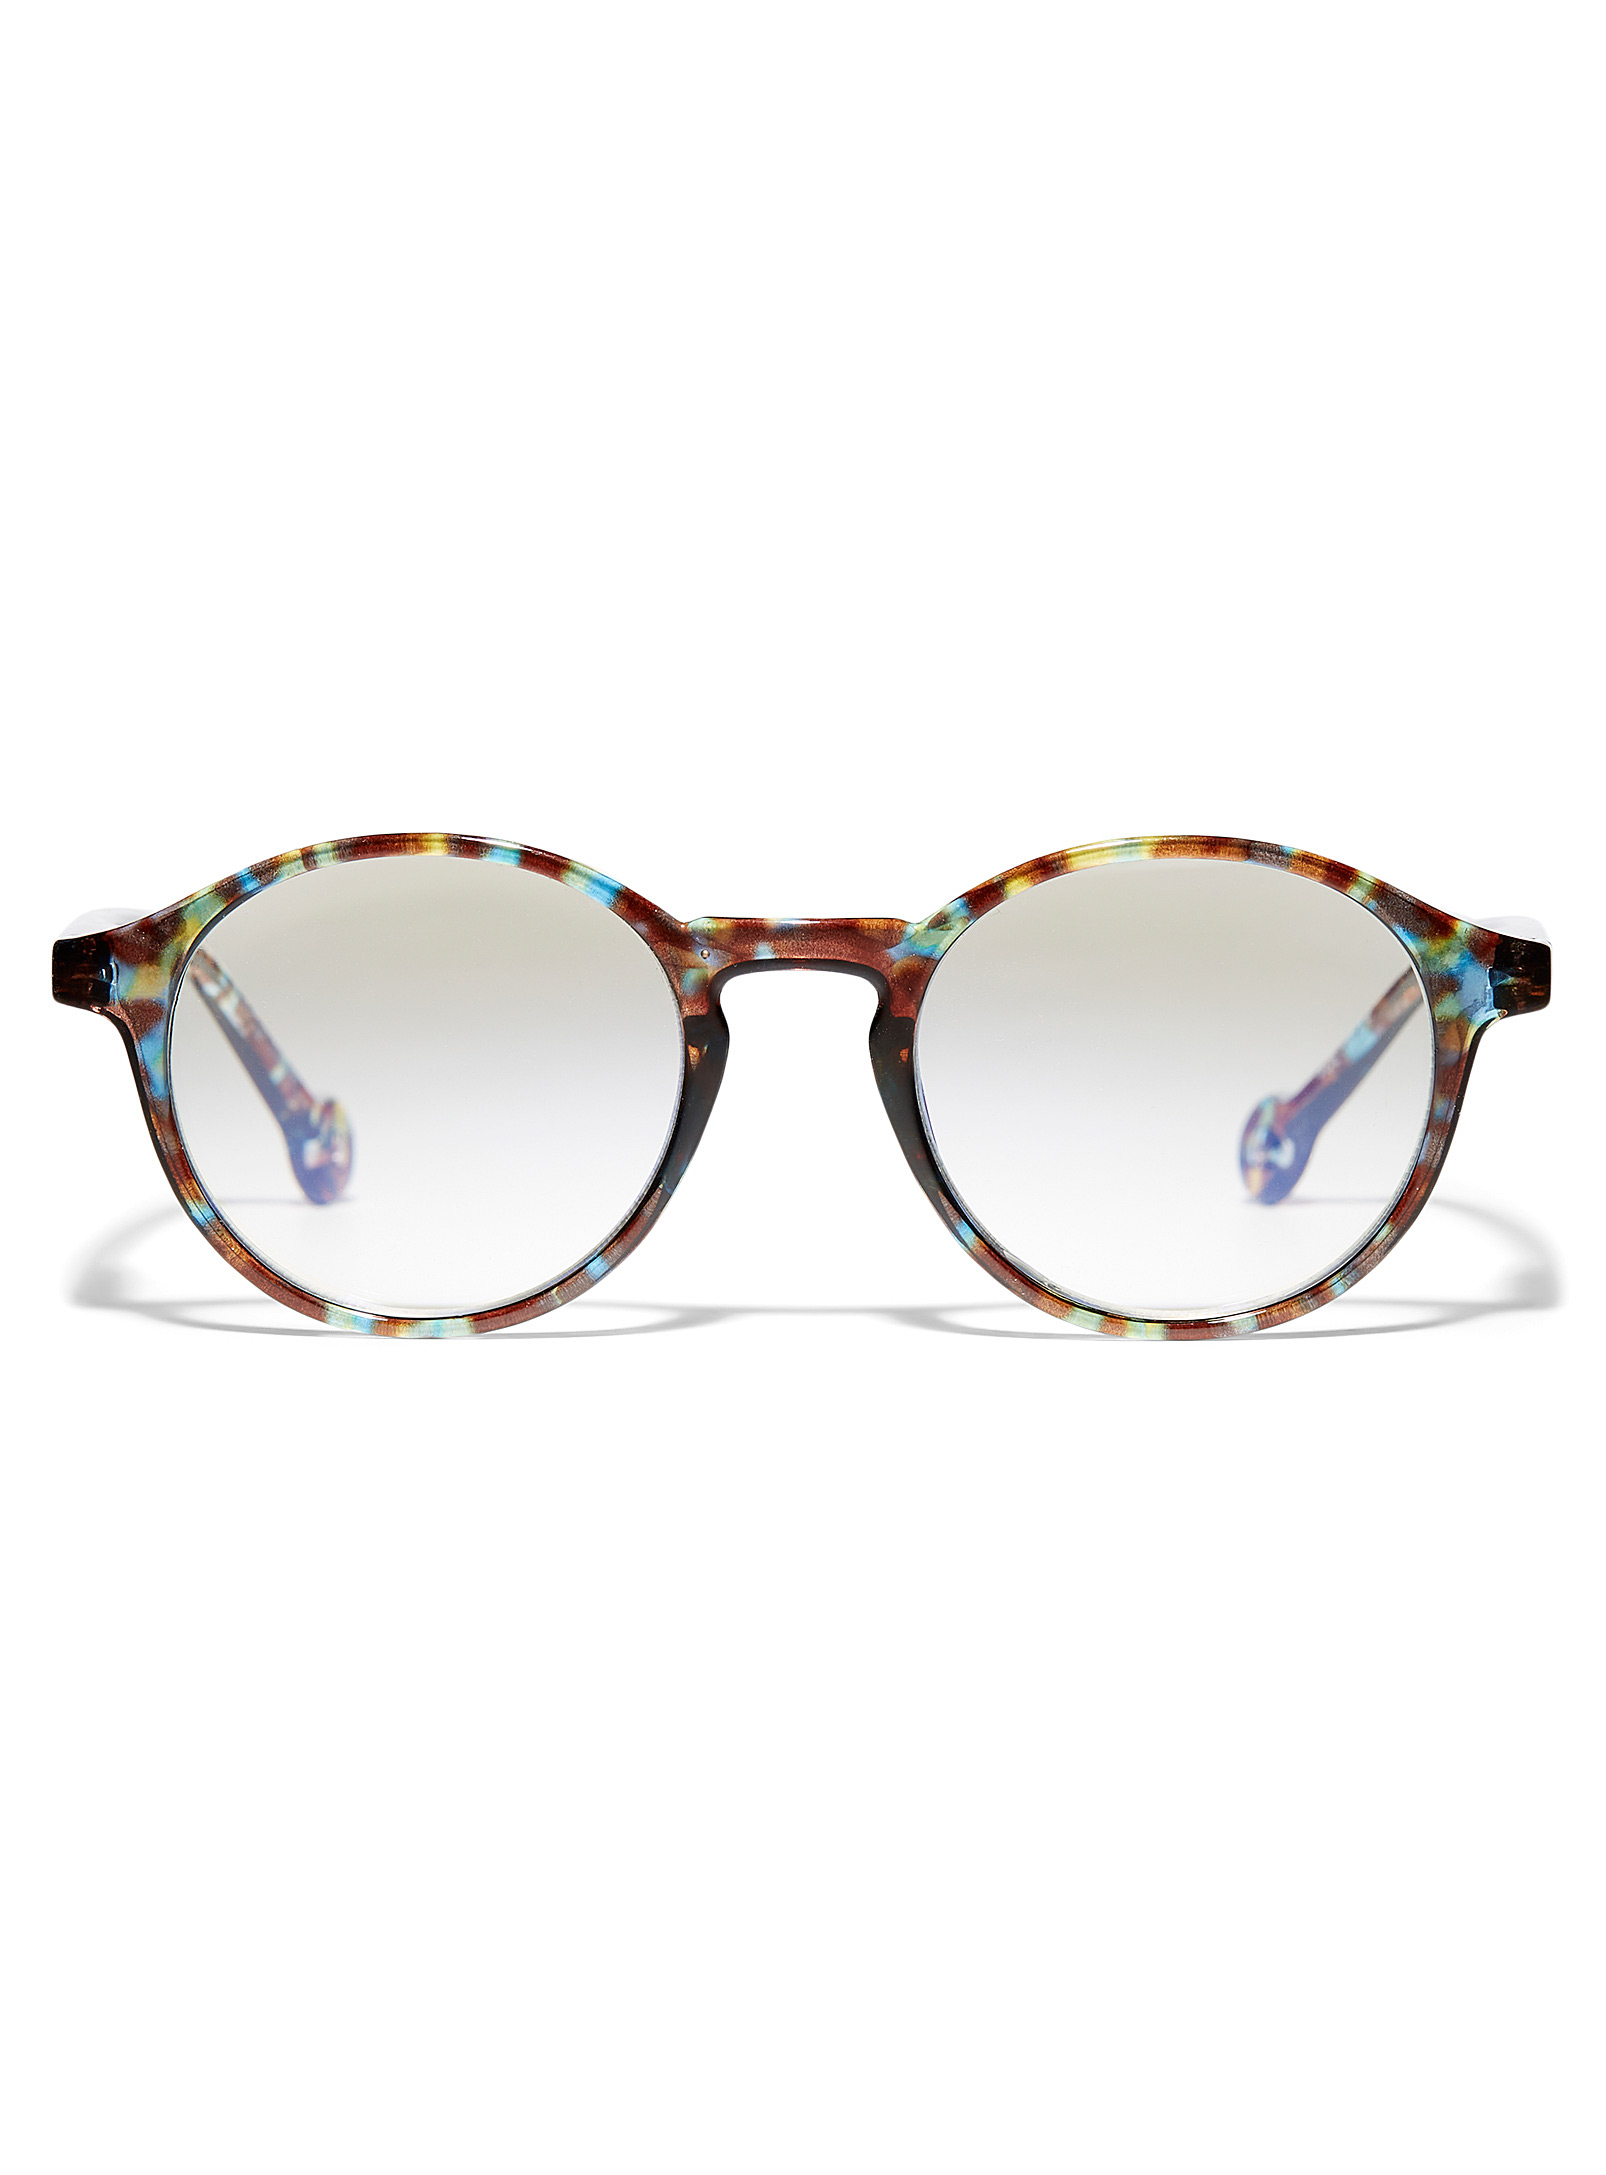 Parafina Volga Round Reading Glasses In Patterned Blue